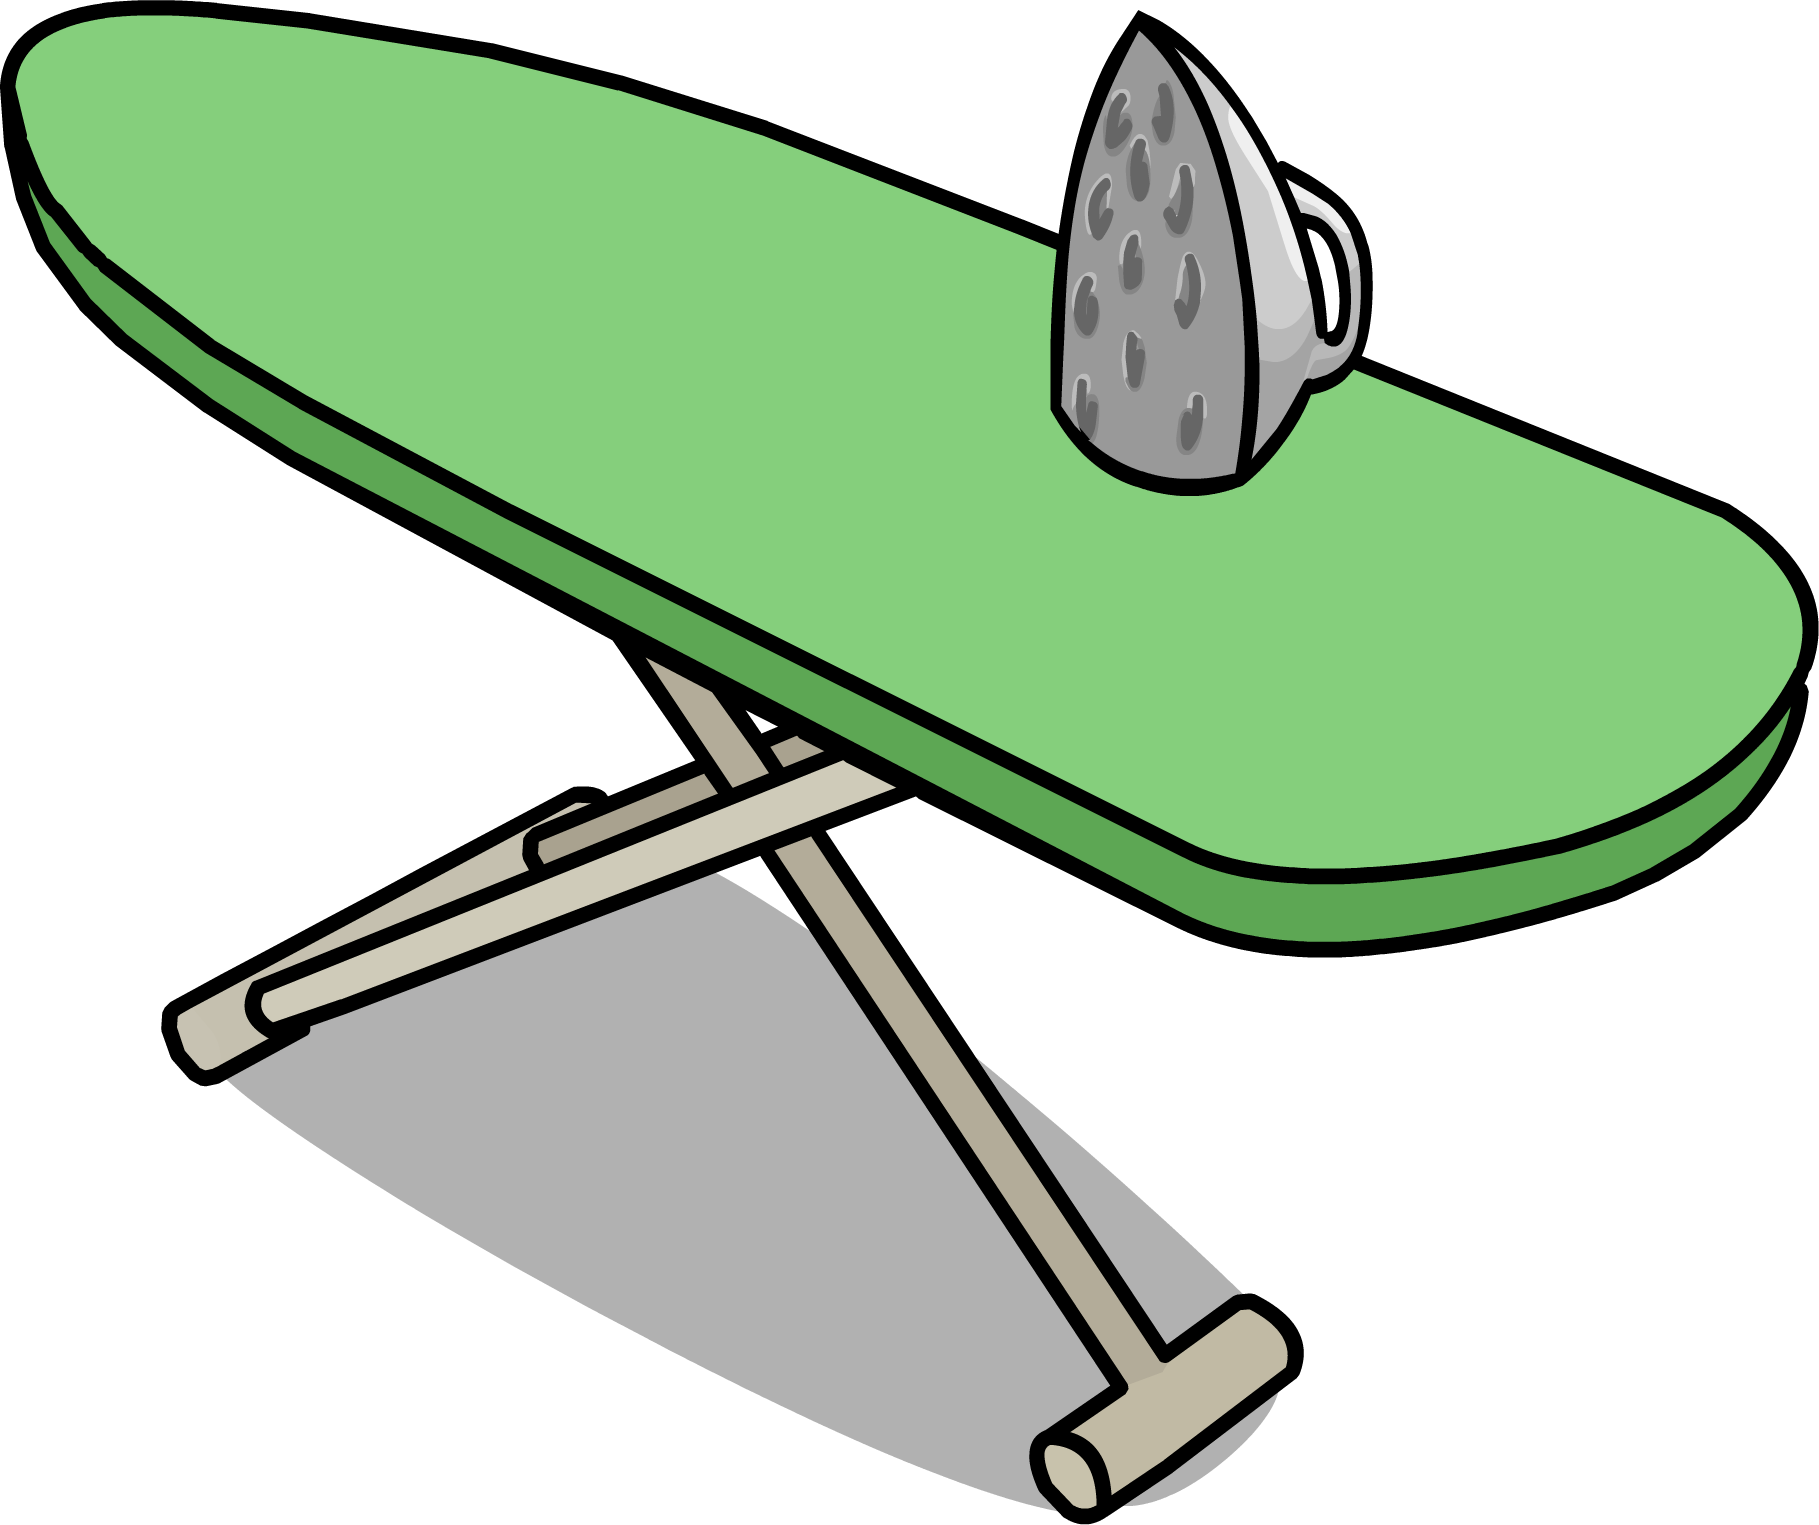 Ironing Board Sprite 012 - Ironing Board Clipart (1819x1525)